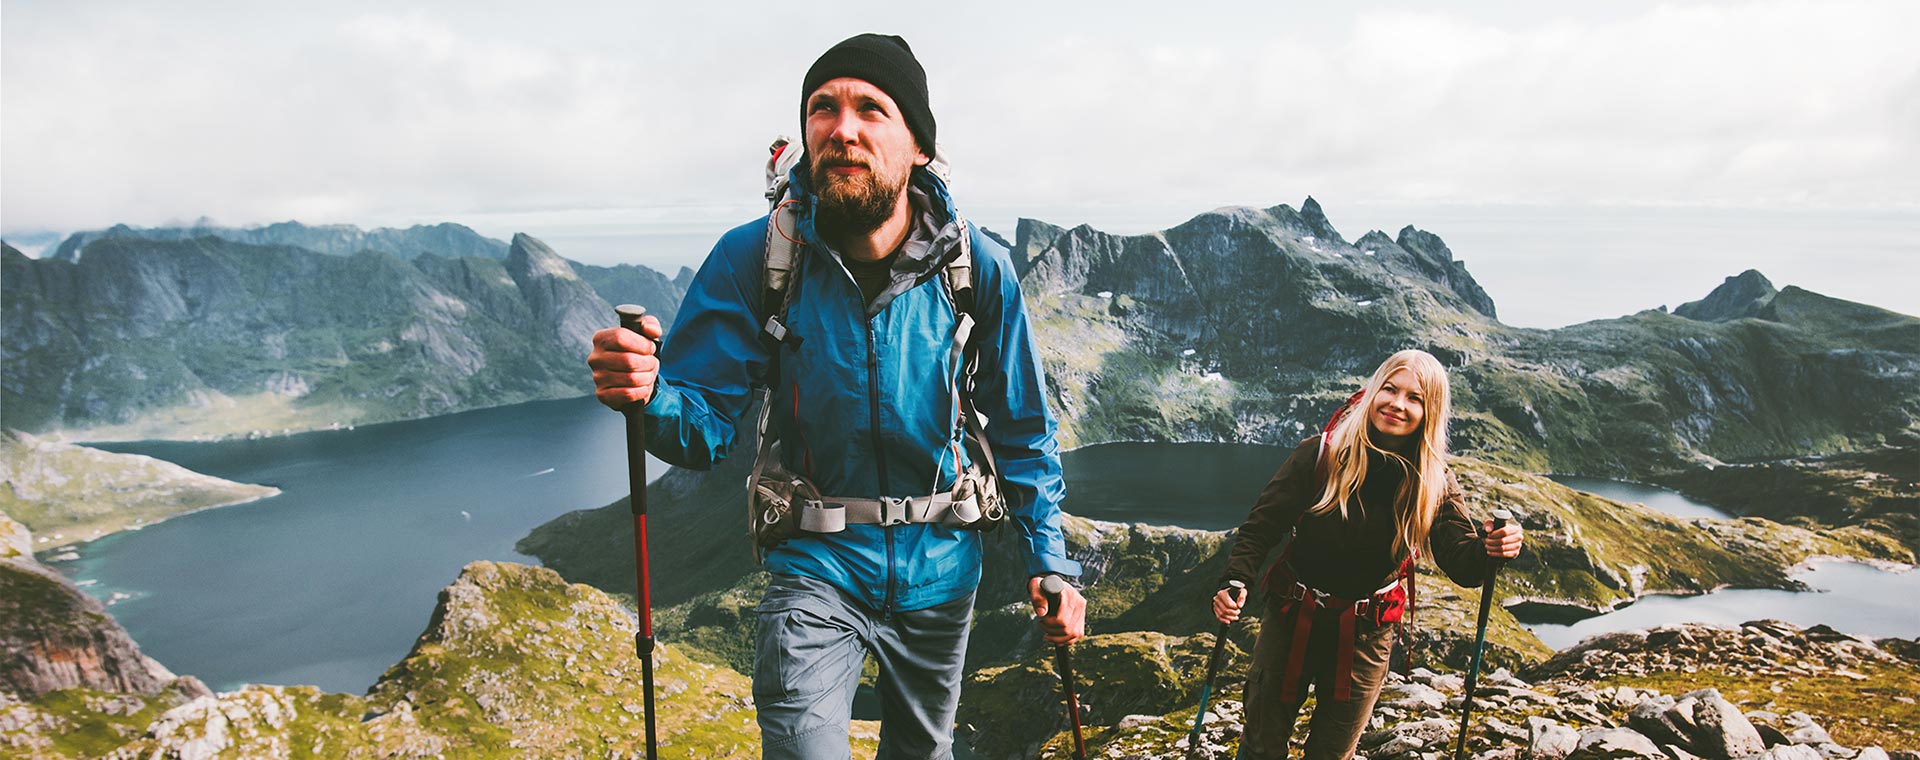 A man and a woman are hiking in the mountains, they have reached a summit and behind them is a lake. They are both wearing rain coats and large backpacks. They are using poles to assist in walk.